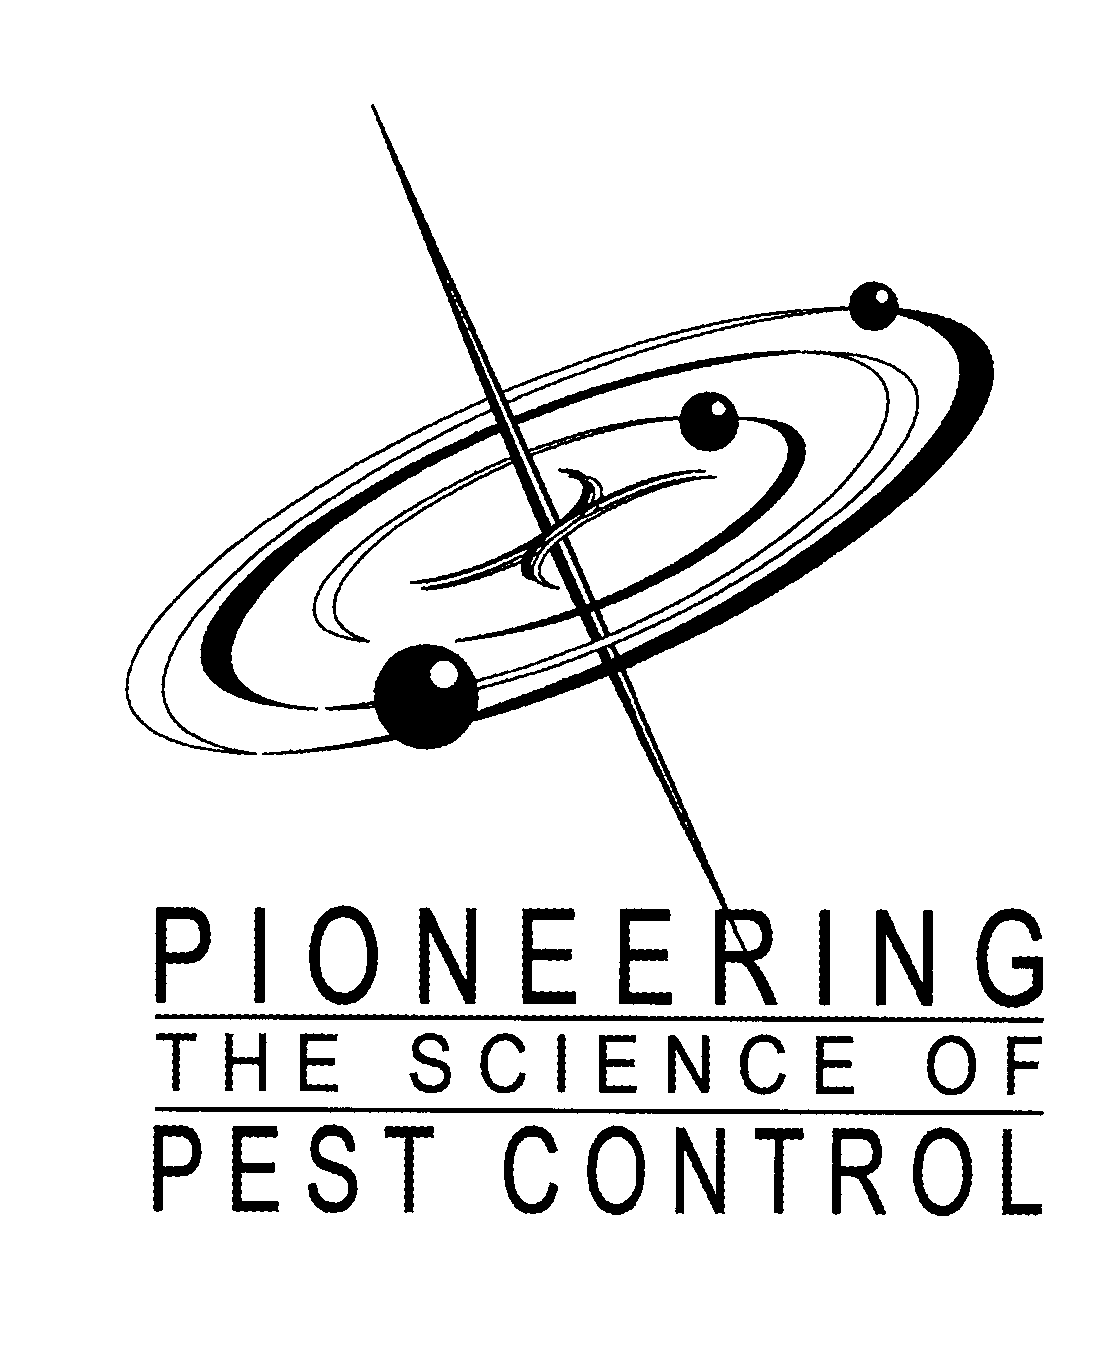  PIONEERING THE SCIENCE OF PEST CONTROL